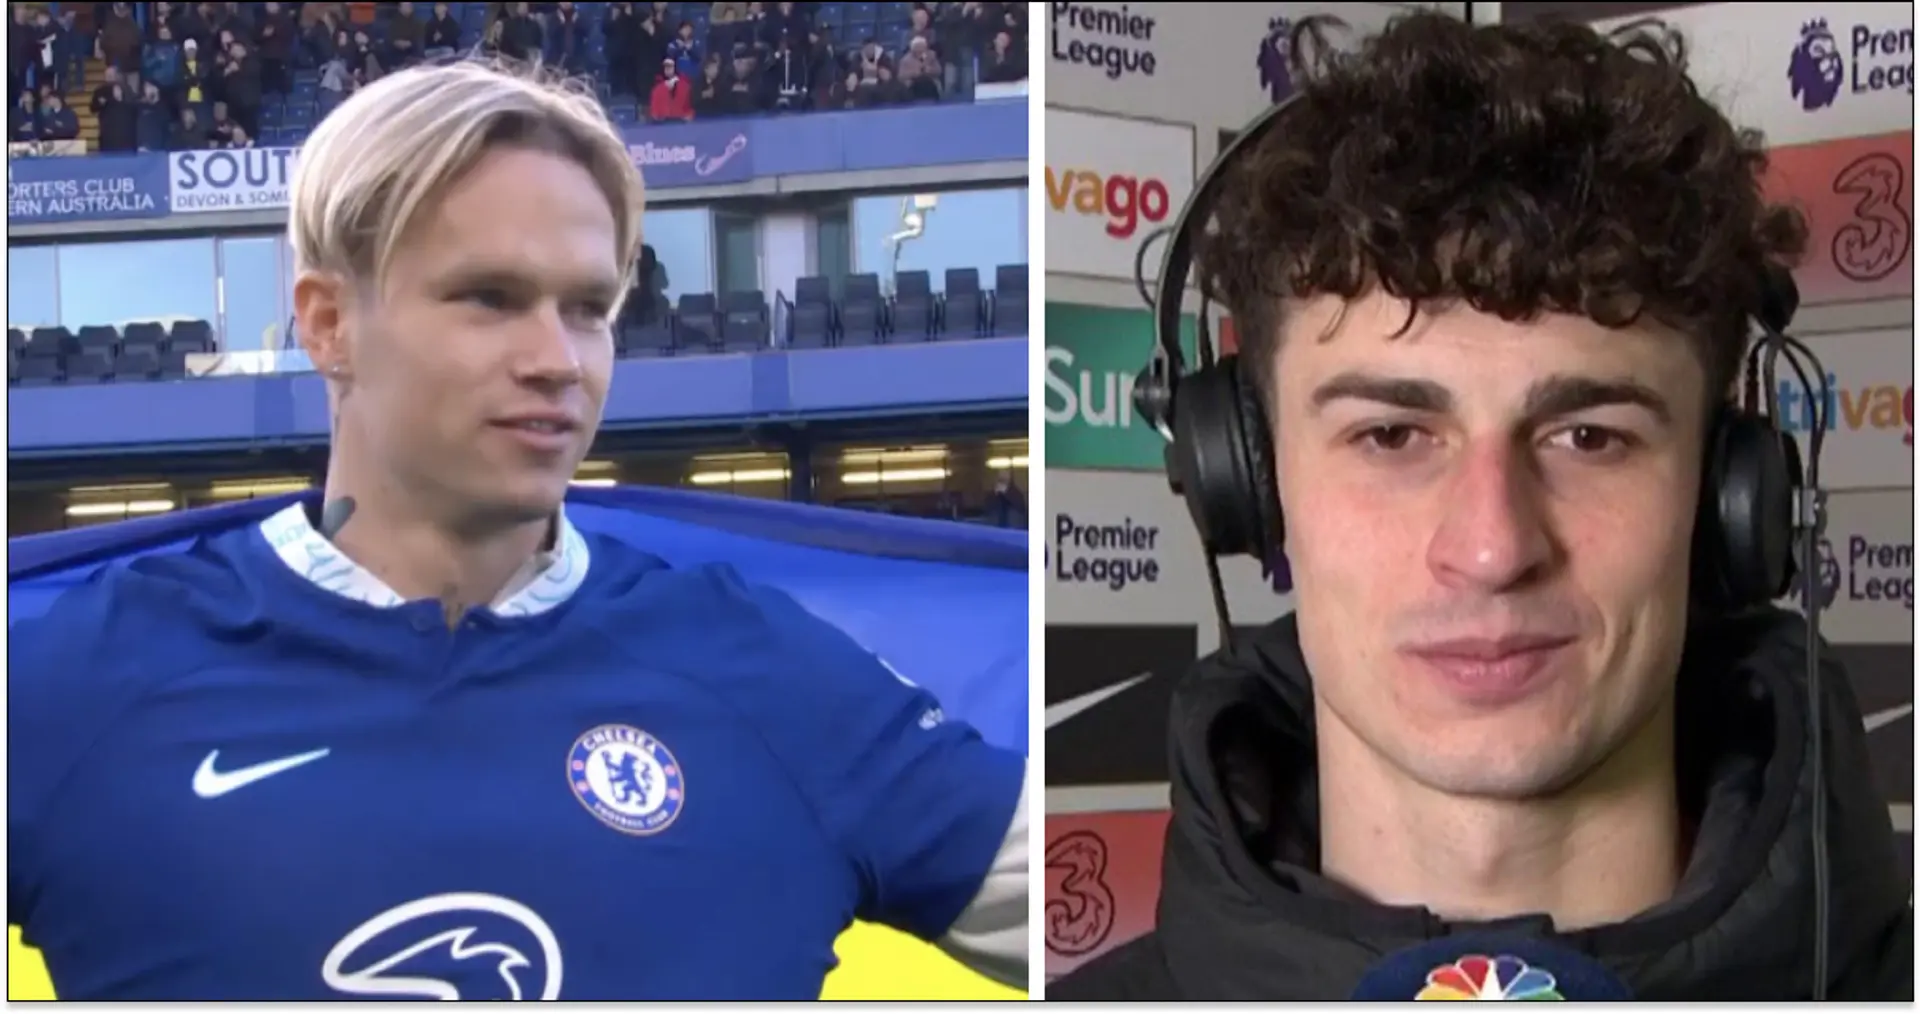 'A different way to announce it!': Kepa on Chelsea unveiling Mudryk at half-time of Palace game